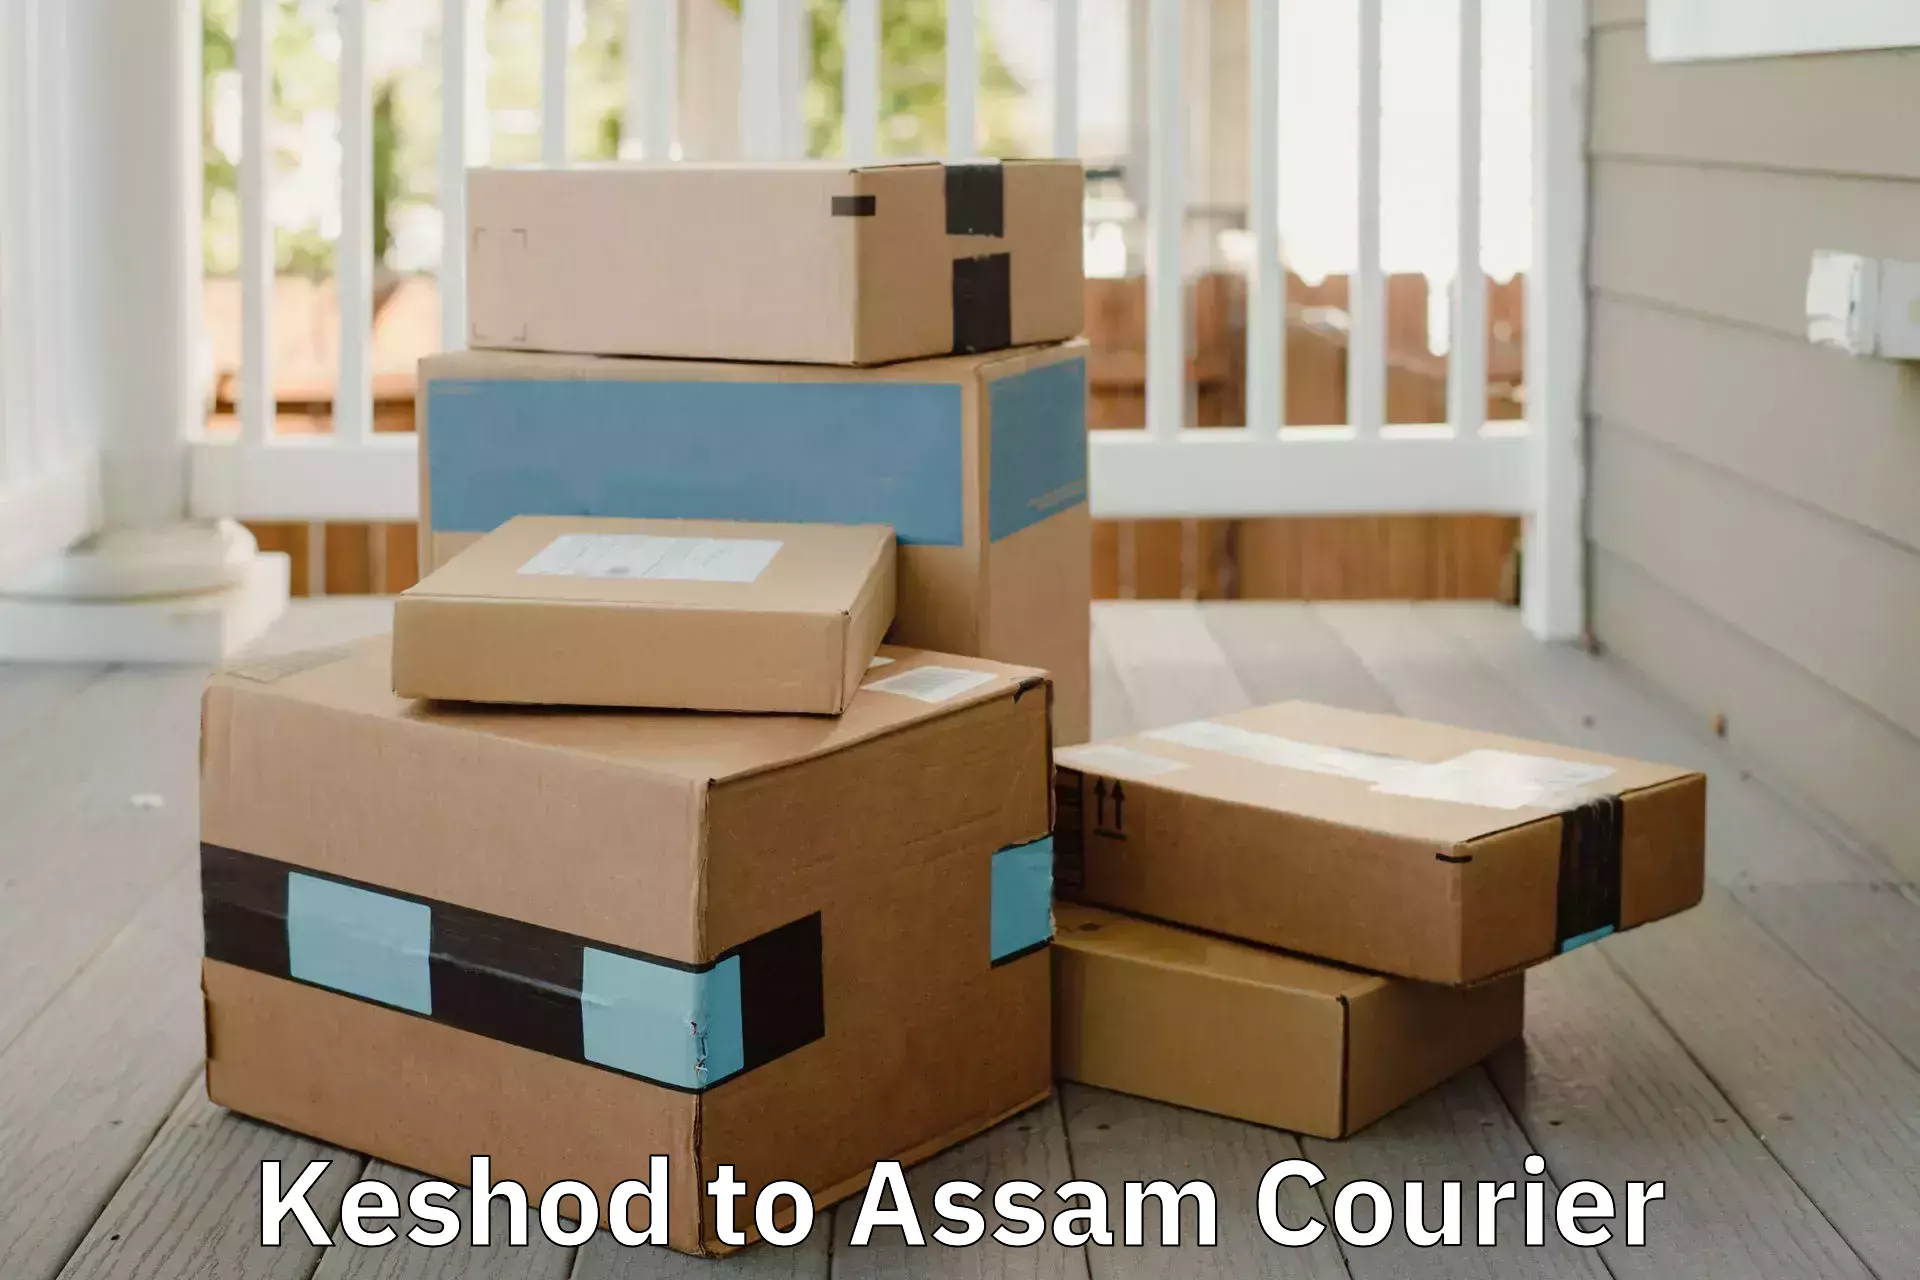 Trusted moving company Keshod to Assam